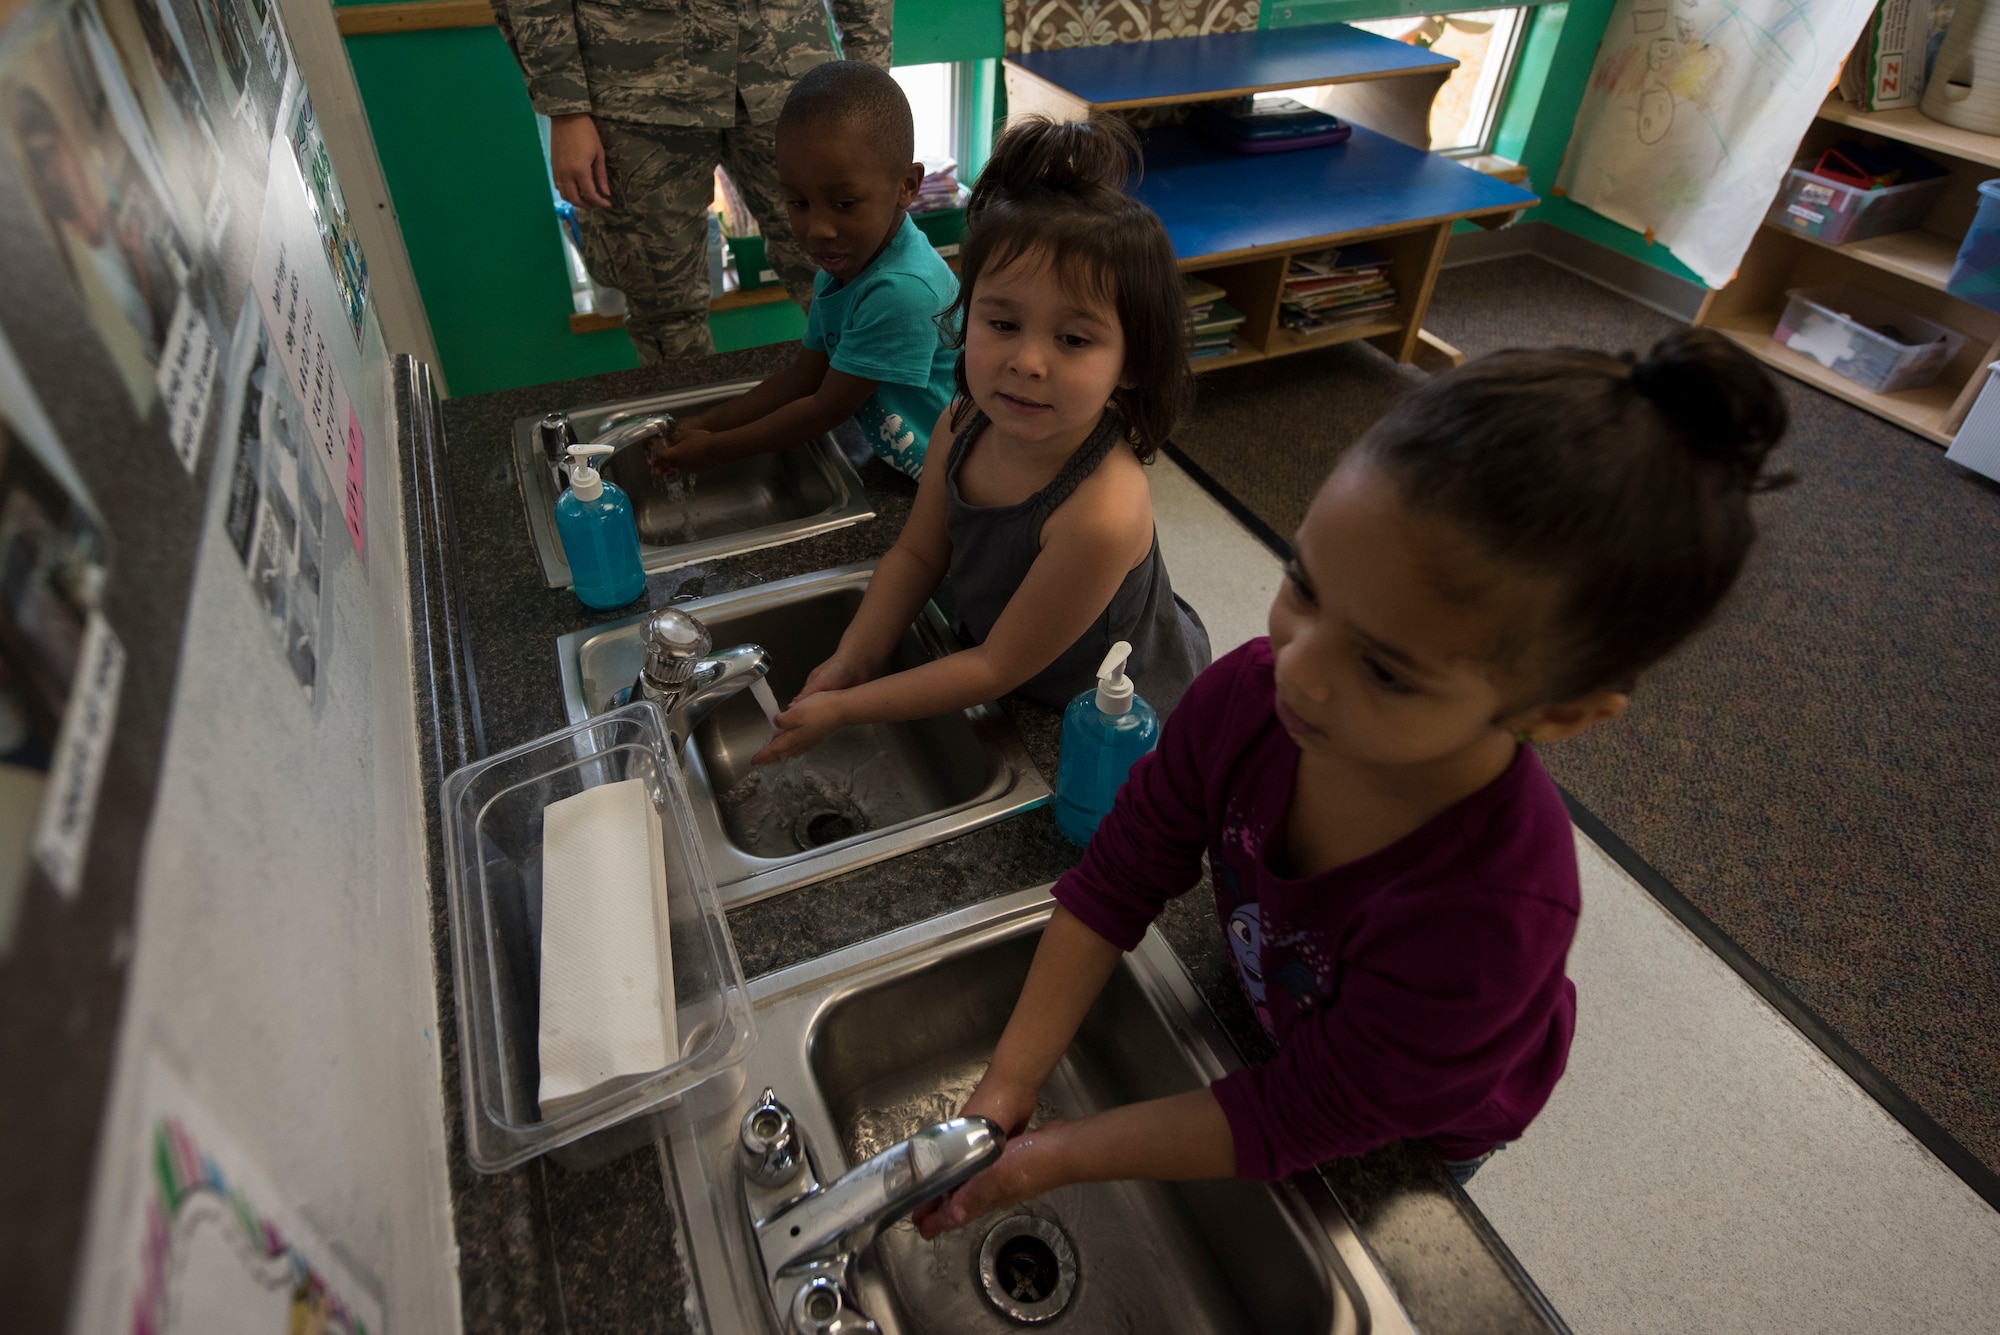 Children wash their hands Oct. 16, 2018, during a hand washing demonstration at the Child Development Center on Dover Air Force Base, Del. The demonstration involved a Glow Germ Classroom Kit that showed children how illnesses spread and how important it is to routinely and thoroughly wash one’s hands. (U.S. Air Force photo by Airman 1st Class Zoe M. Wockenfuss)